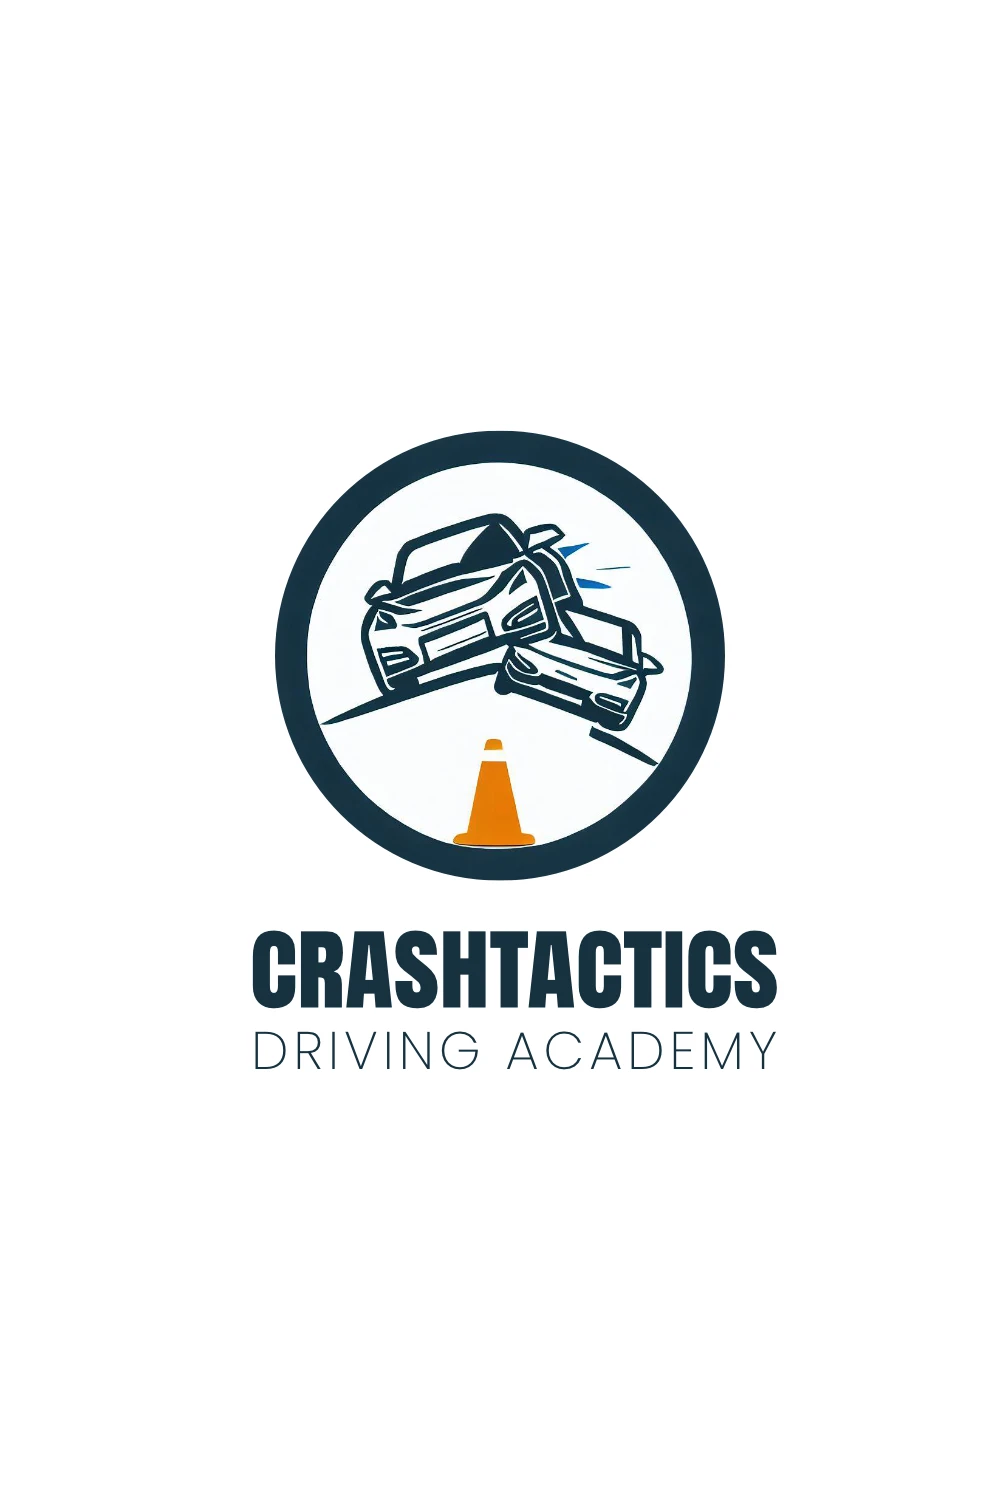 Memorable and Recognizable Logo Design of 2 cars crashing in to each other and a traffic cone in the middle with the text: "CrashTactics Driving Academy"